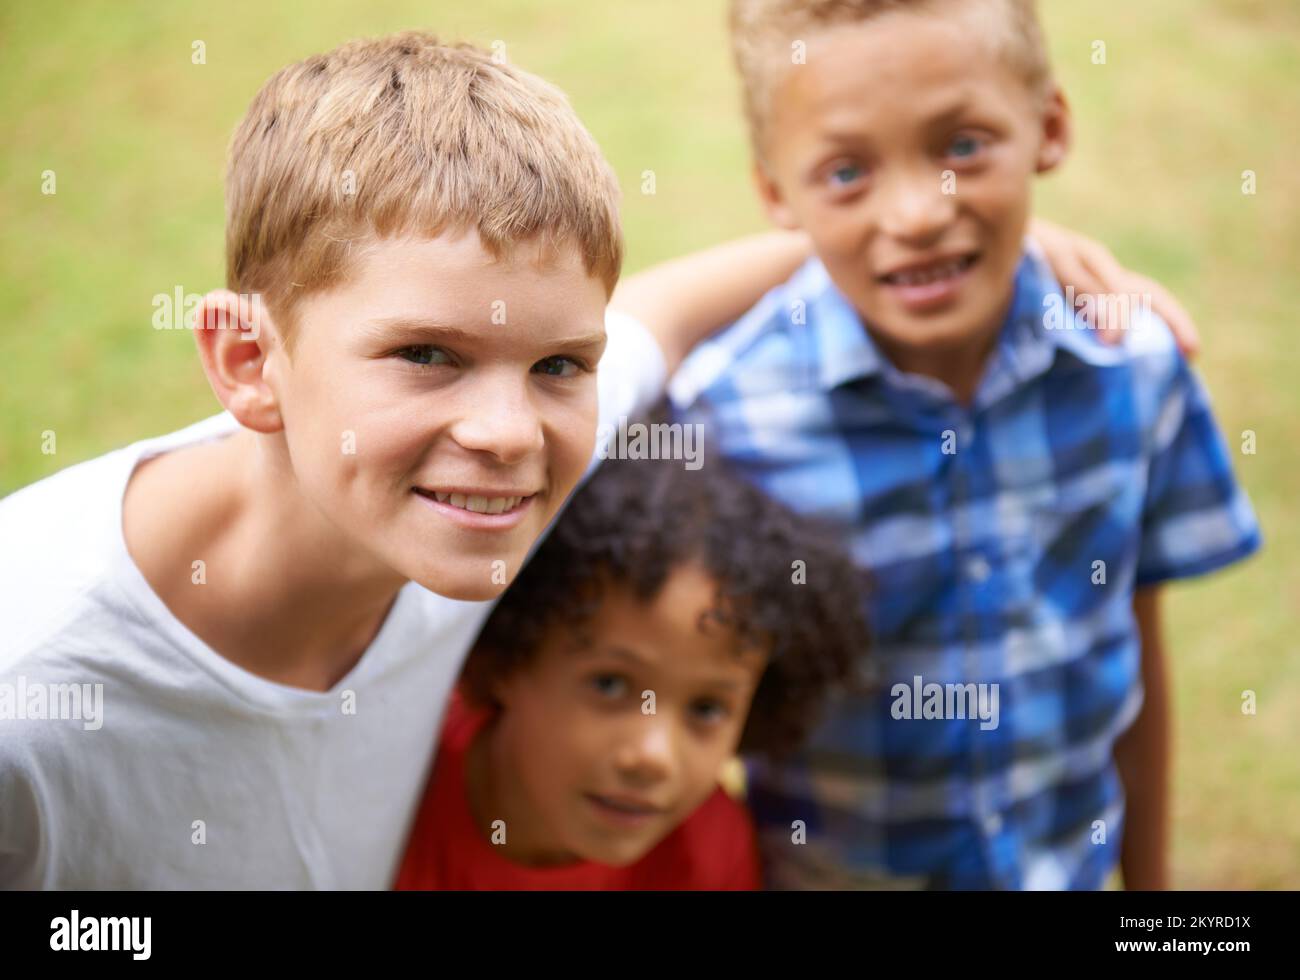 Enjoying Summer with my friends. Portrait of three young kids standing outside. Stock Photo